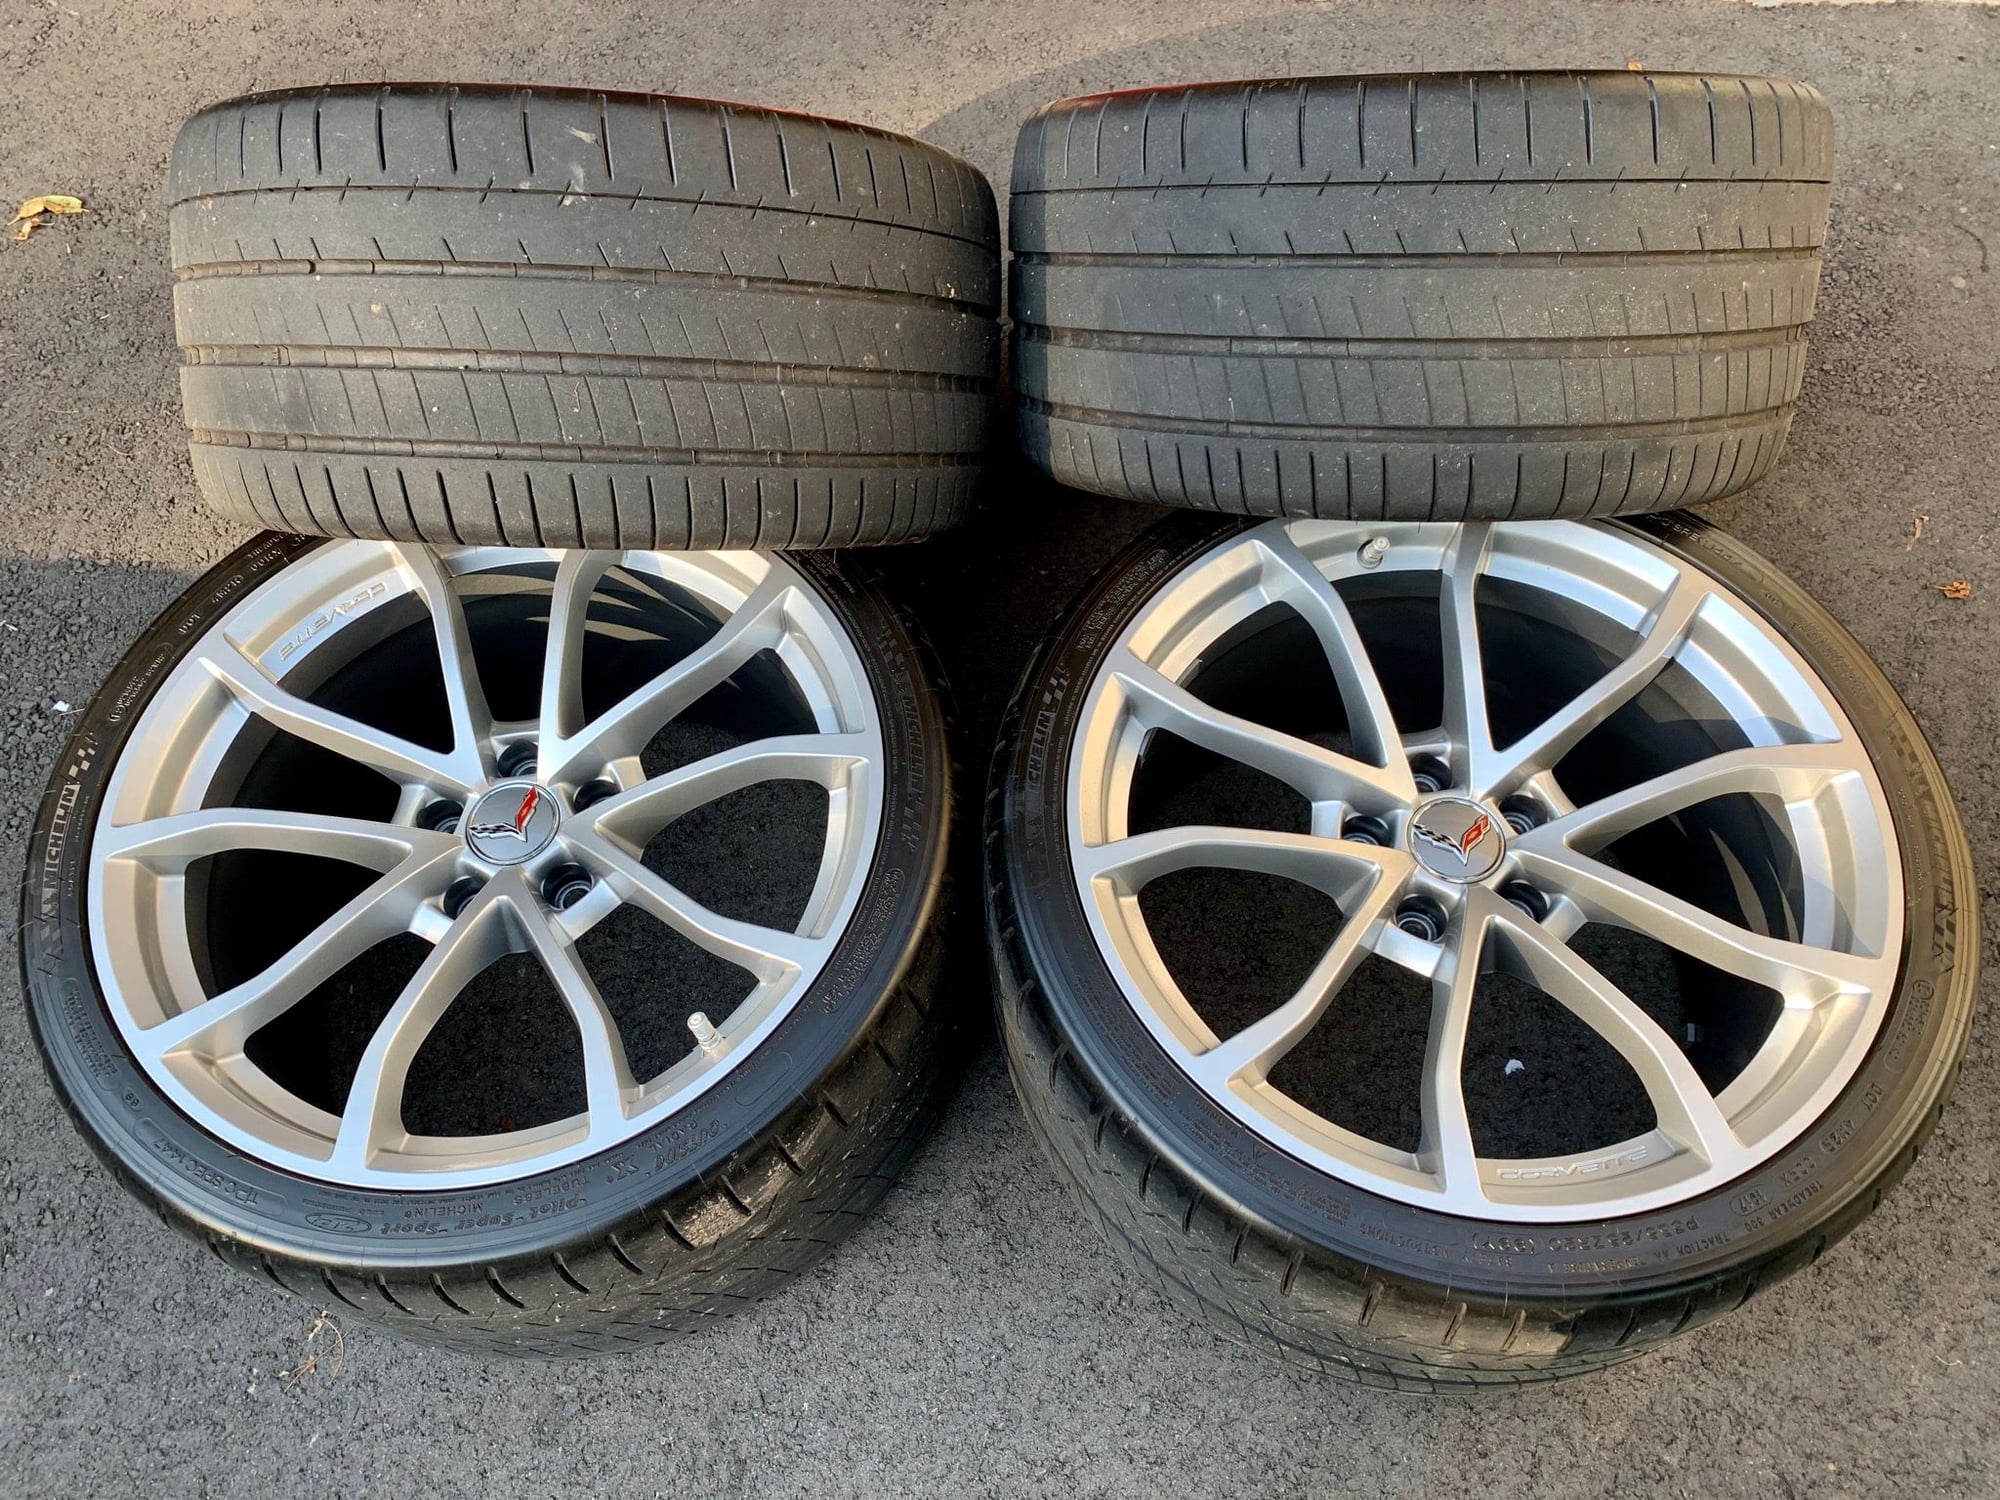 FS (For Sale) 2018 Grand Sport Wheels and Tires! NJ/NY/PA ...